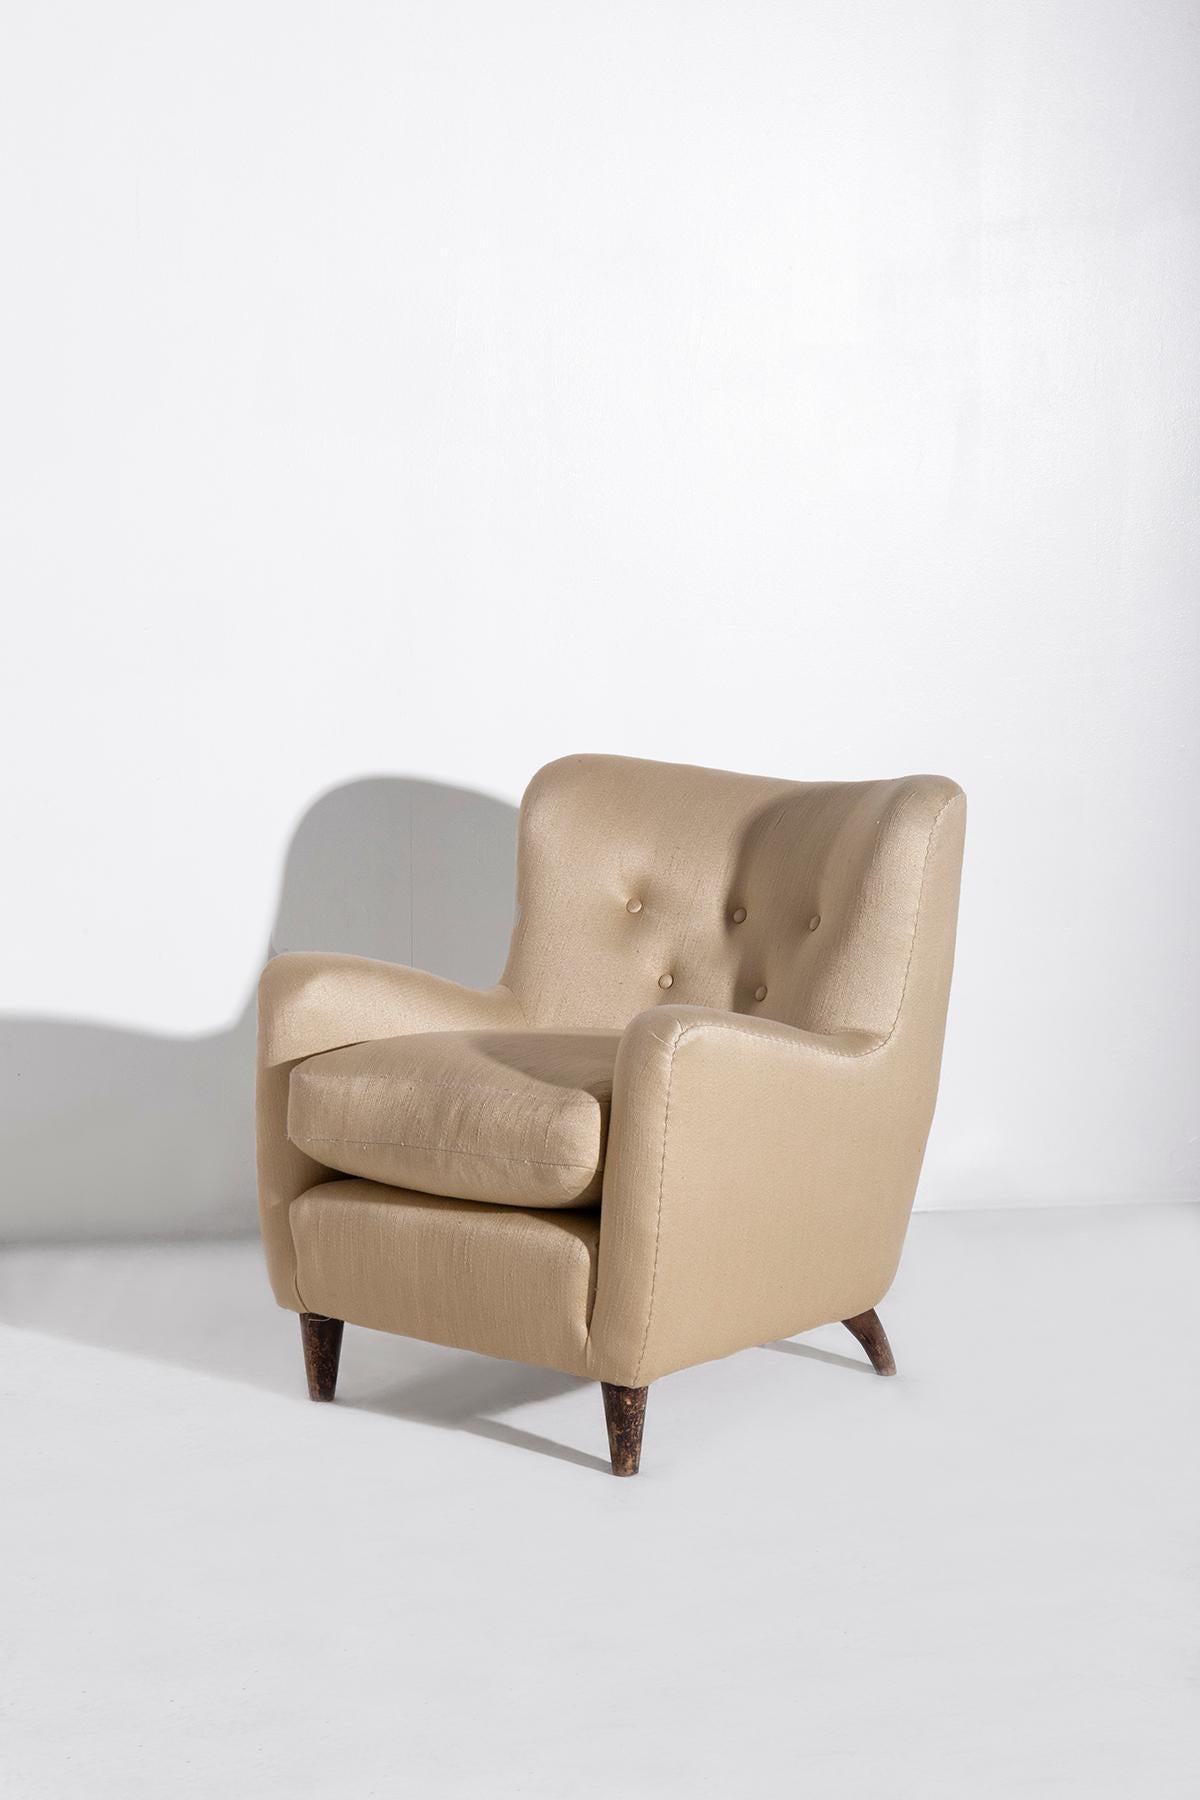 Enter a world where the essence of 1940s Italian design takes center stage, embodied by a rare pair of armchairs designed by the legendary Giò Ponti for a naval project. These exceptional pieces were part of the furnishings aboard the illustrious